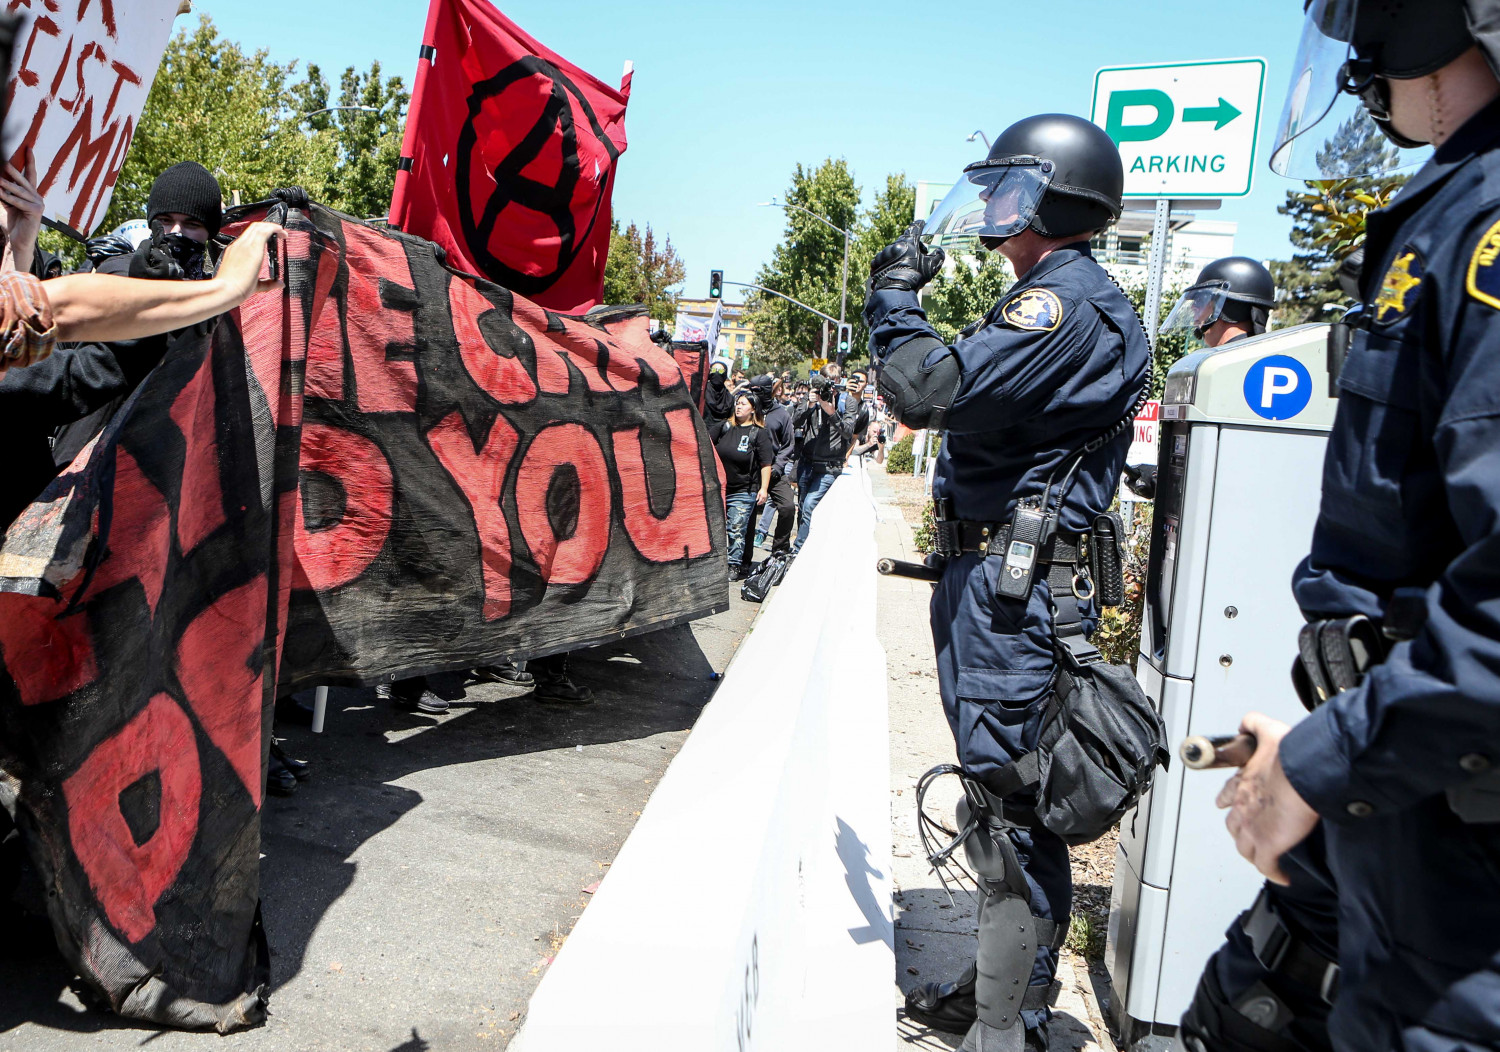 Some Mainstream Journalists May Have Working Relationships With Antifa